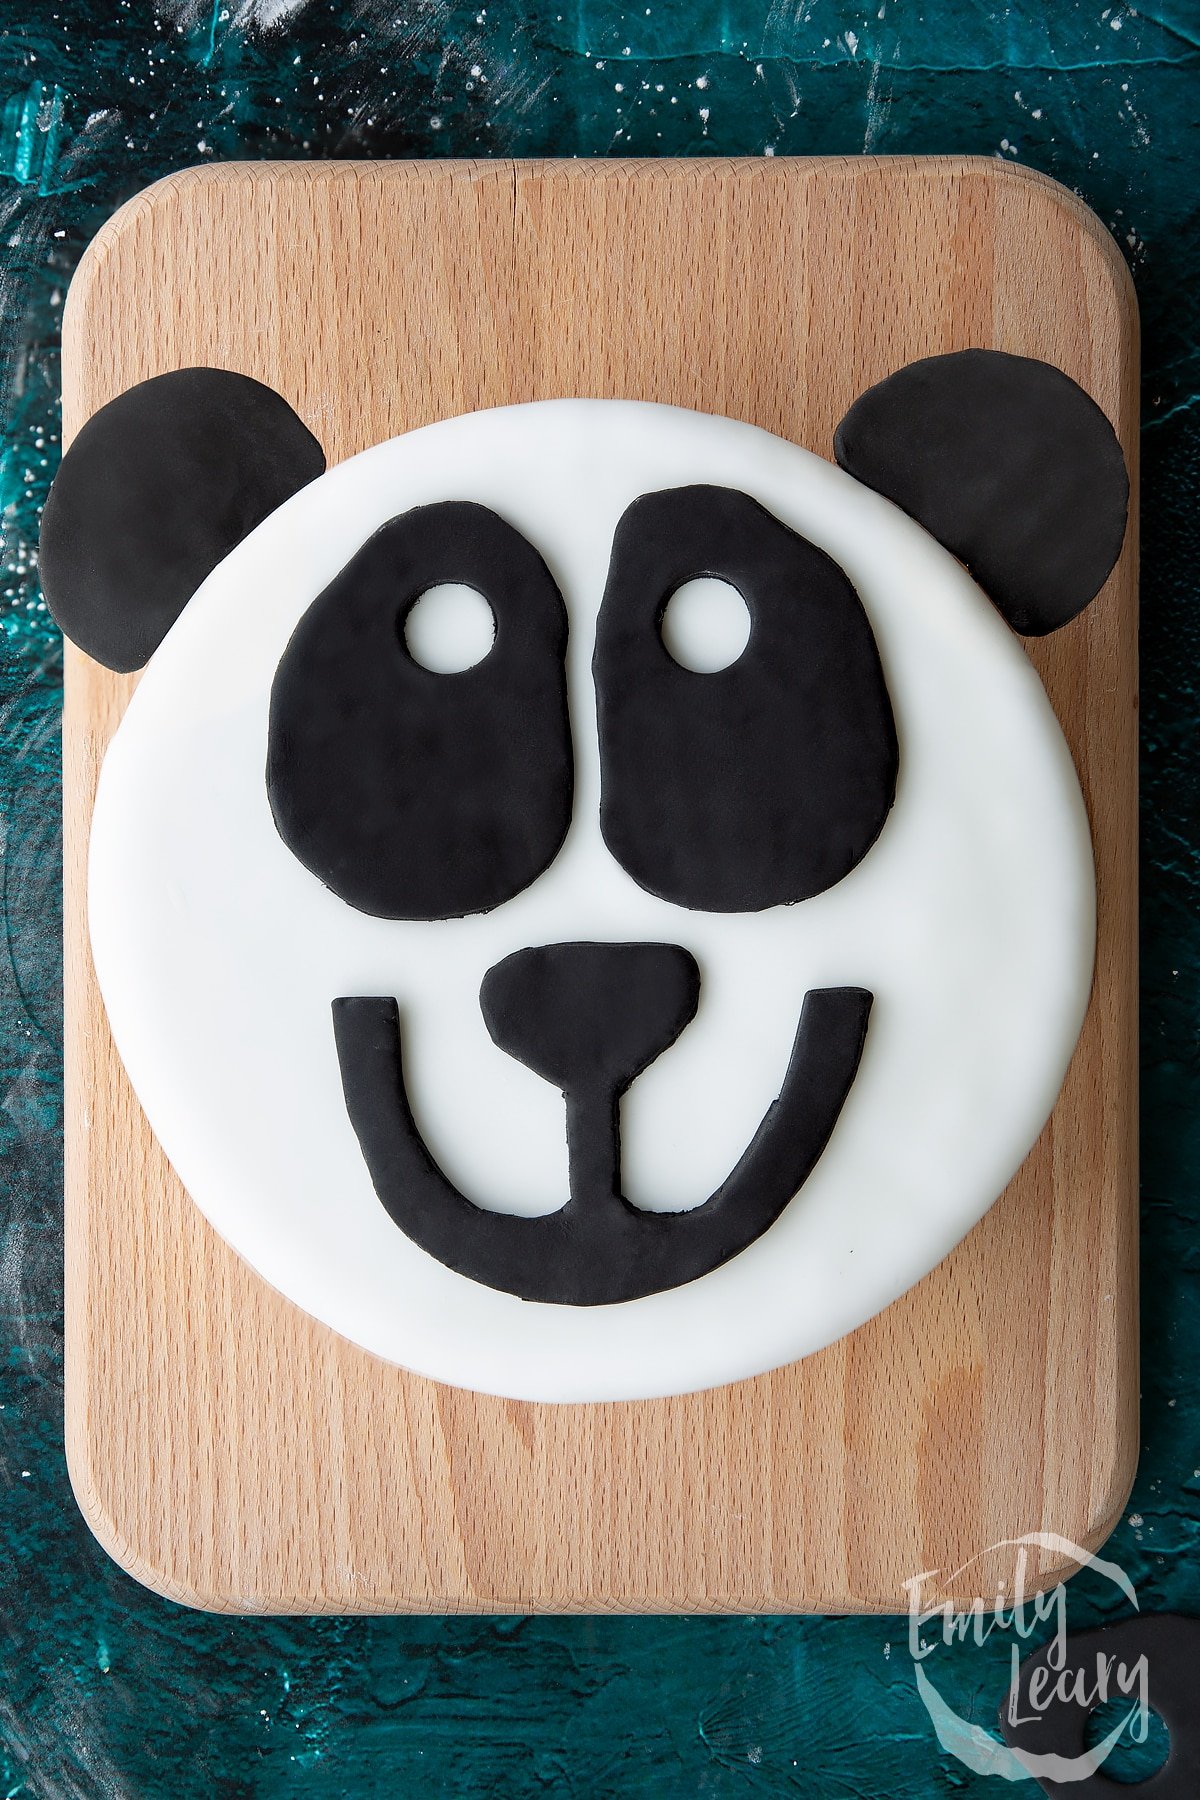 a panda face made of icing on a cake on a wooden board.